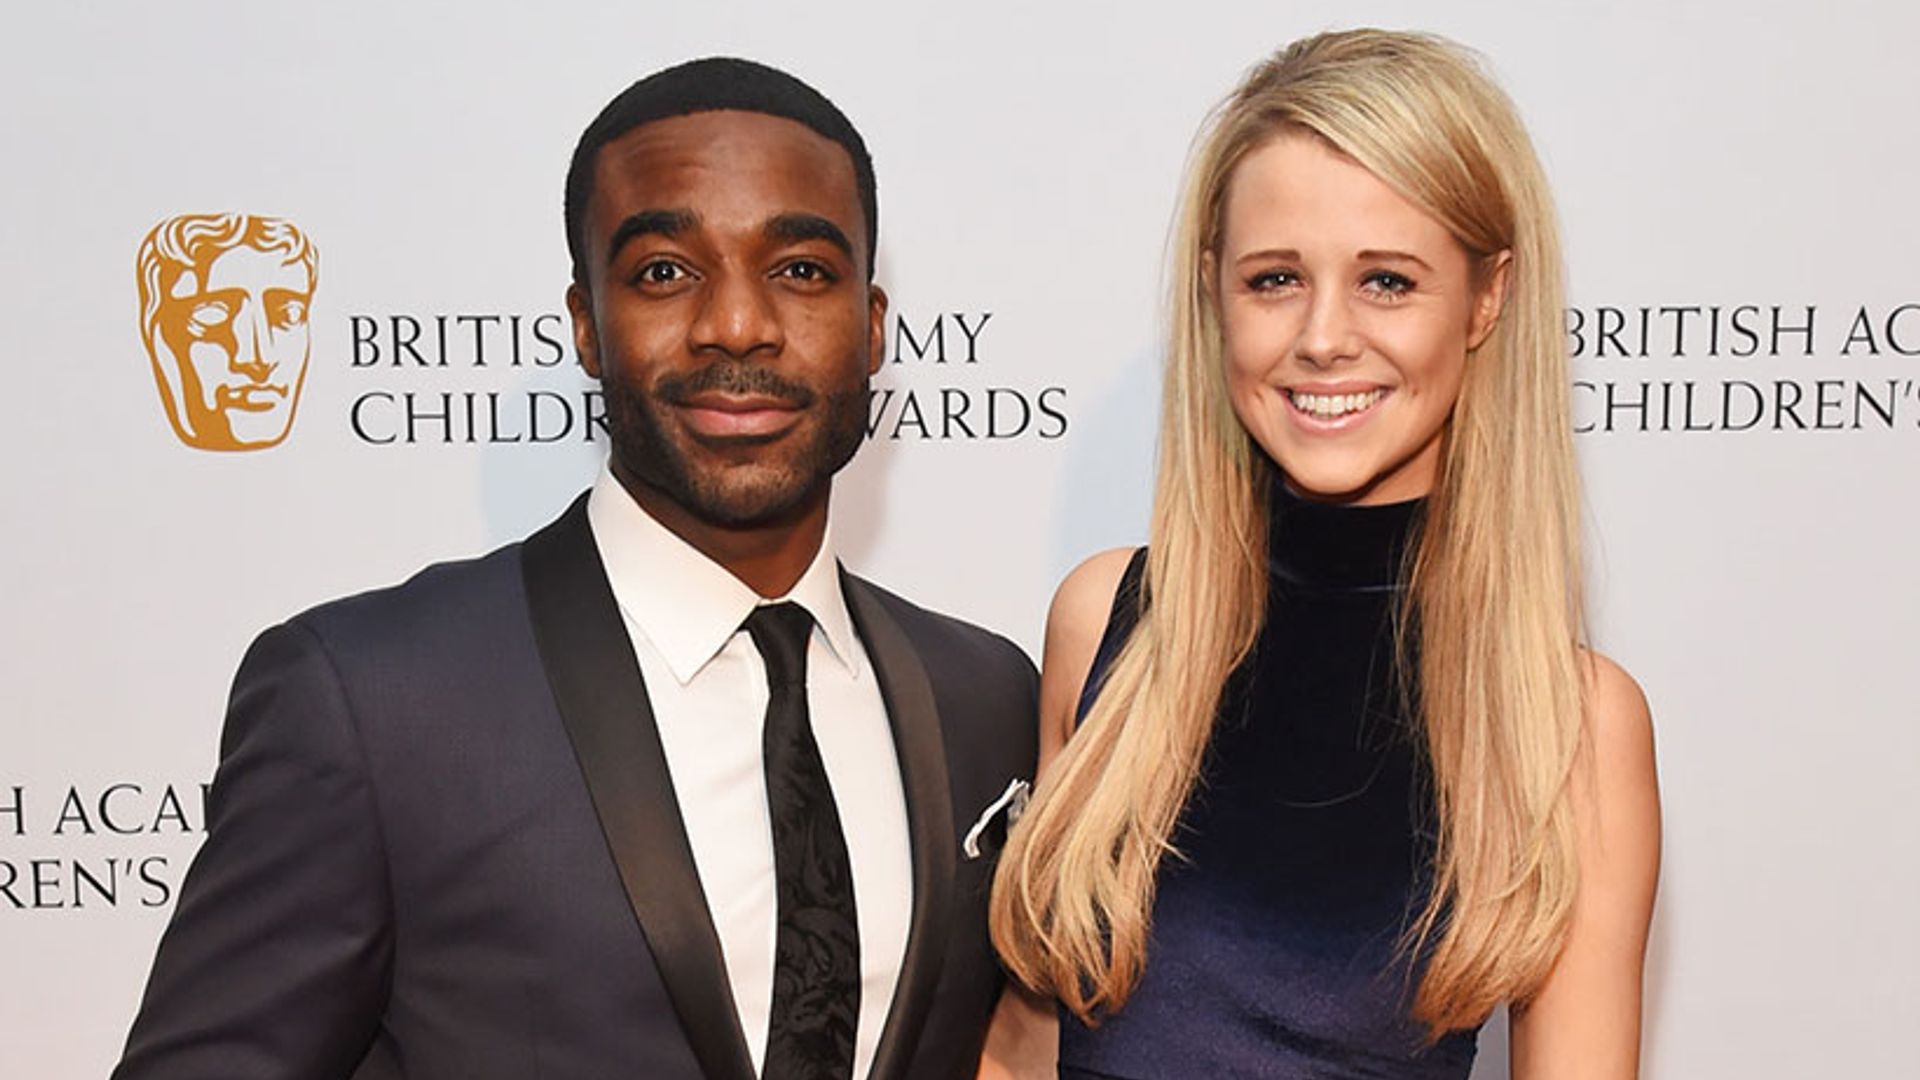 Strictly's Ore Oduba reveals he and his wife Portia are not ready for children